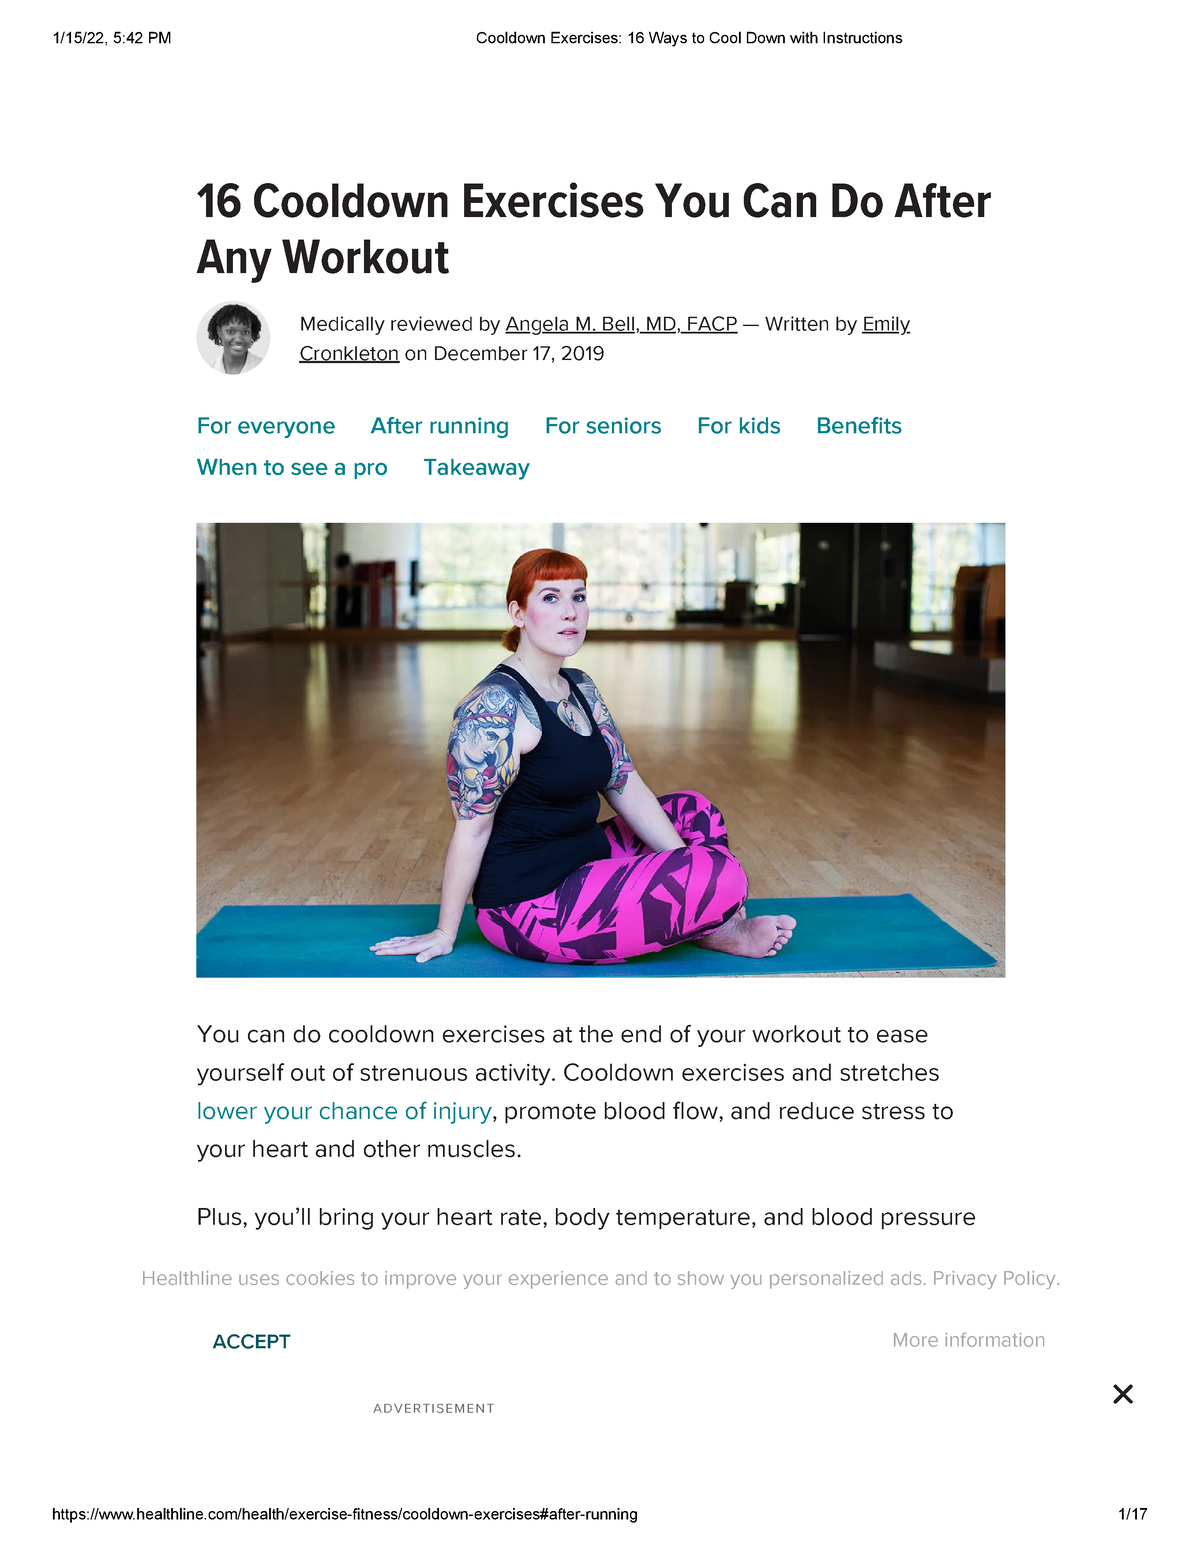 Cooldown Exercises 16 Ways to Cool Down with Instructions